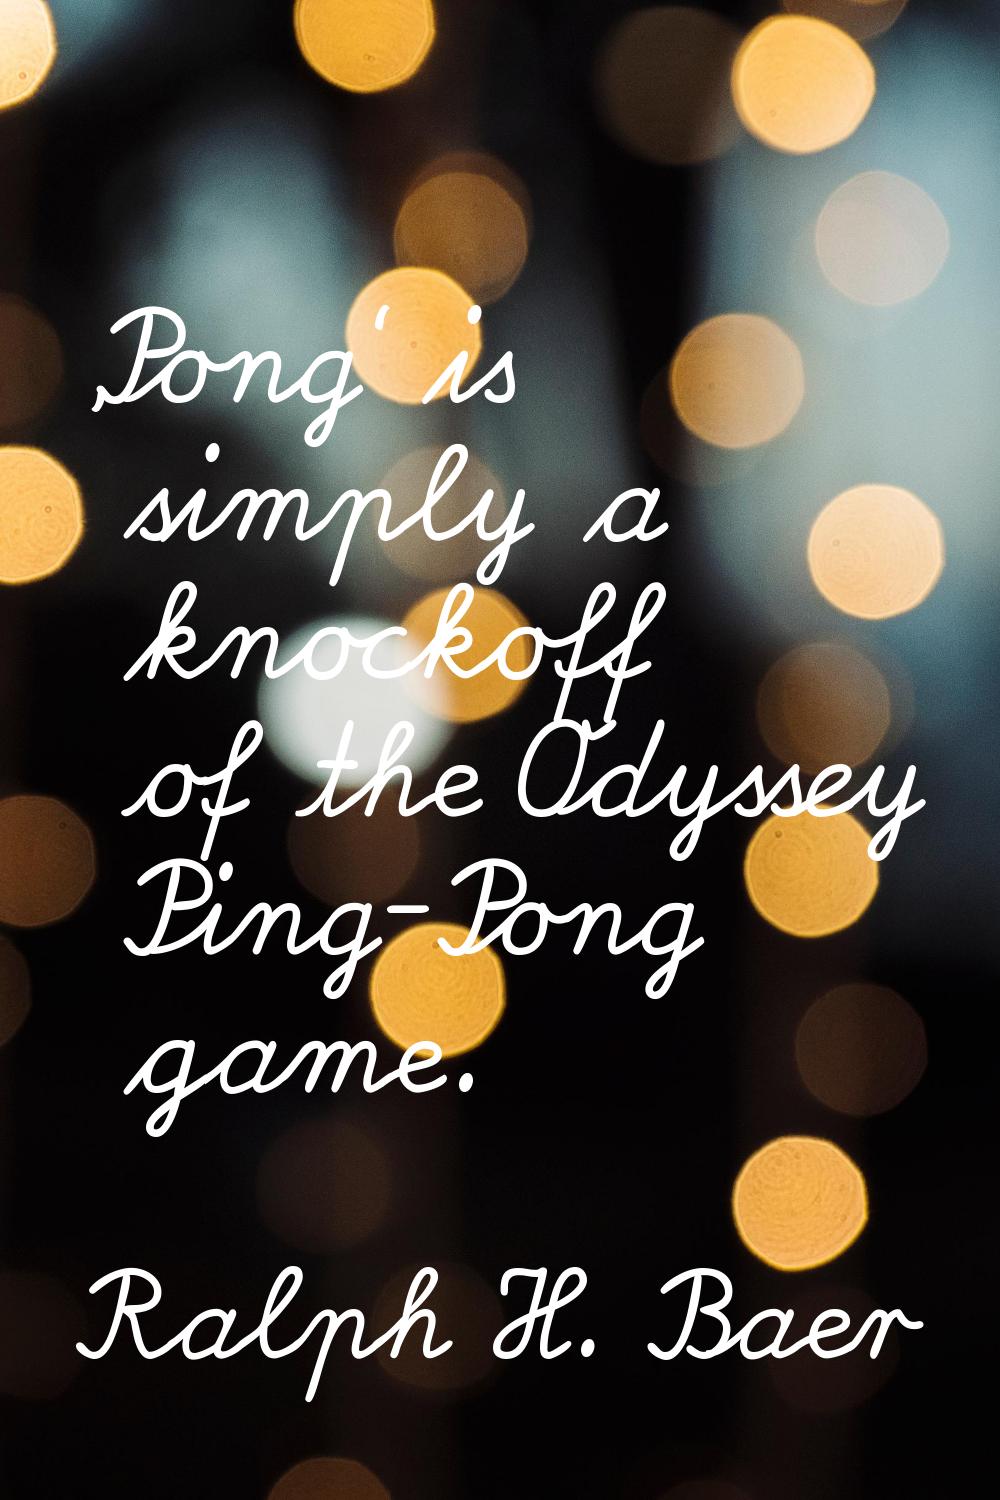 'Pong' is simply a knockoff of the Odyssey Ping-Pong game.